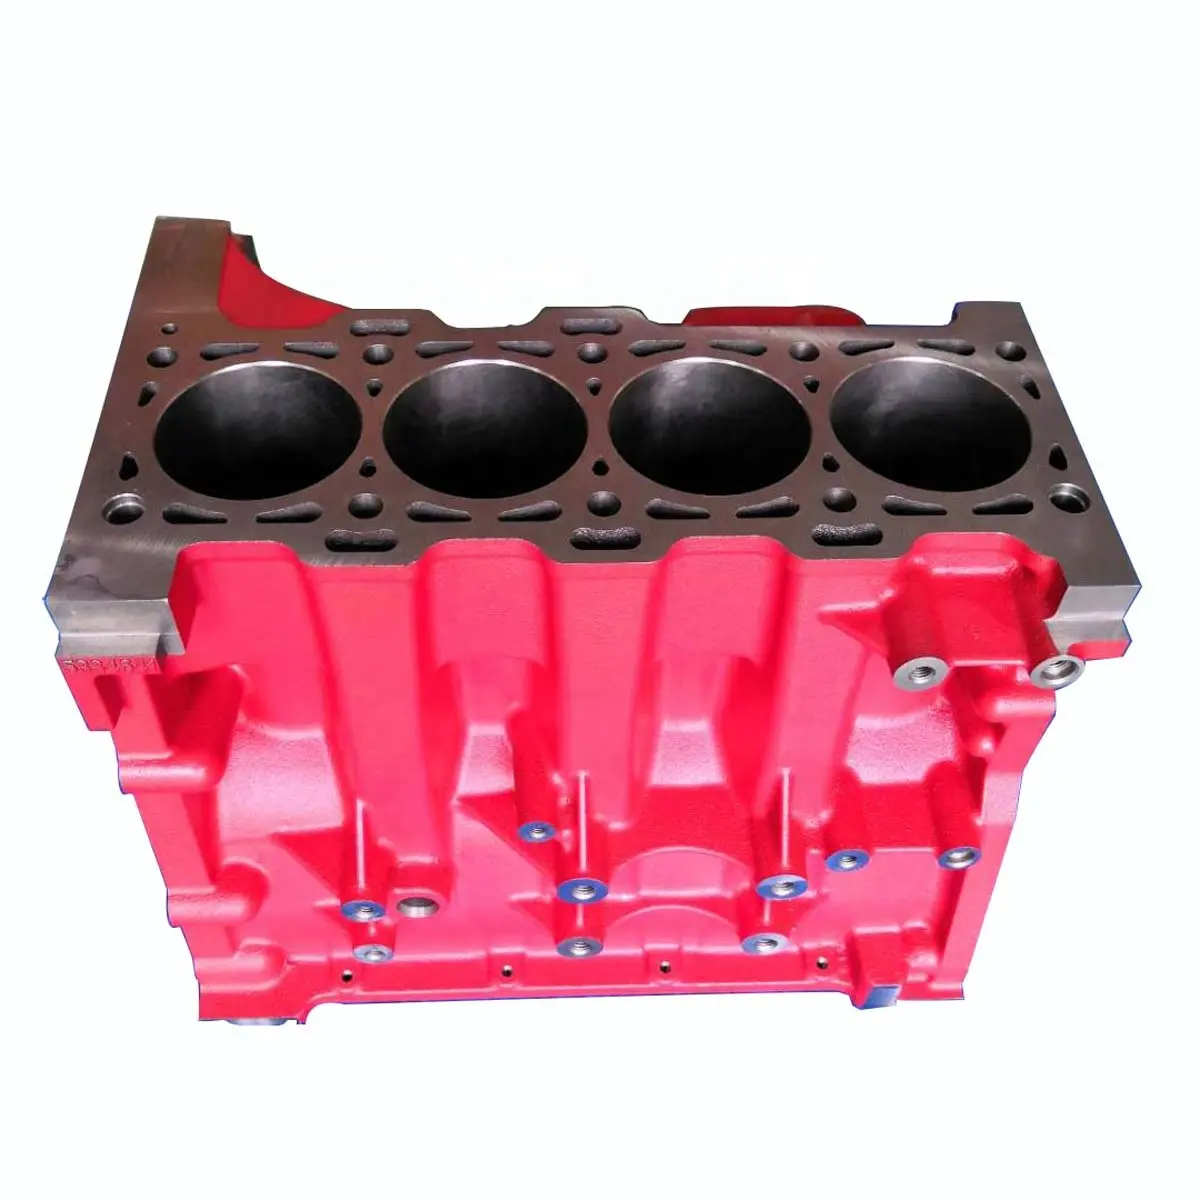 Cummins air-cooled machinery engines parts ISF2.8 ISF3.8 engine cylinder block 5334639 5261257